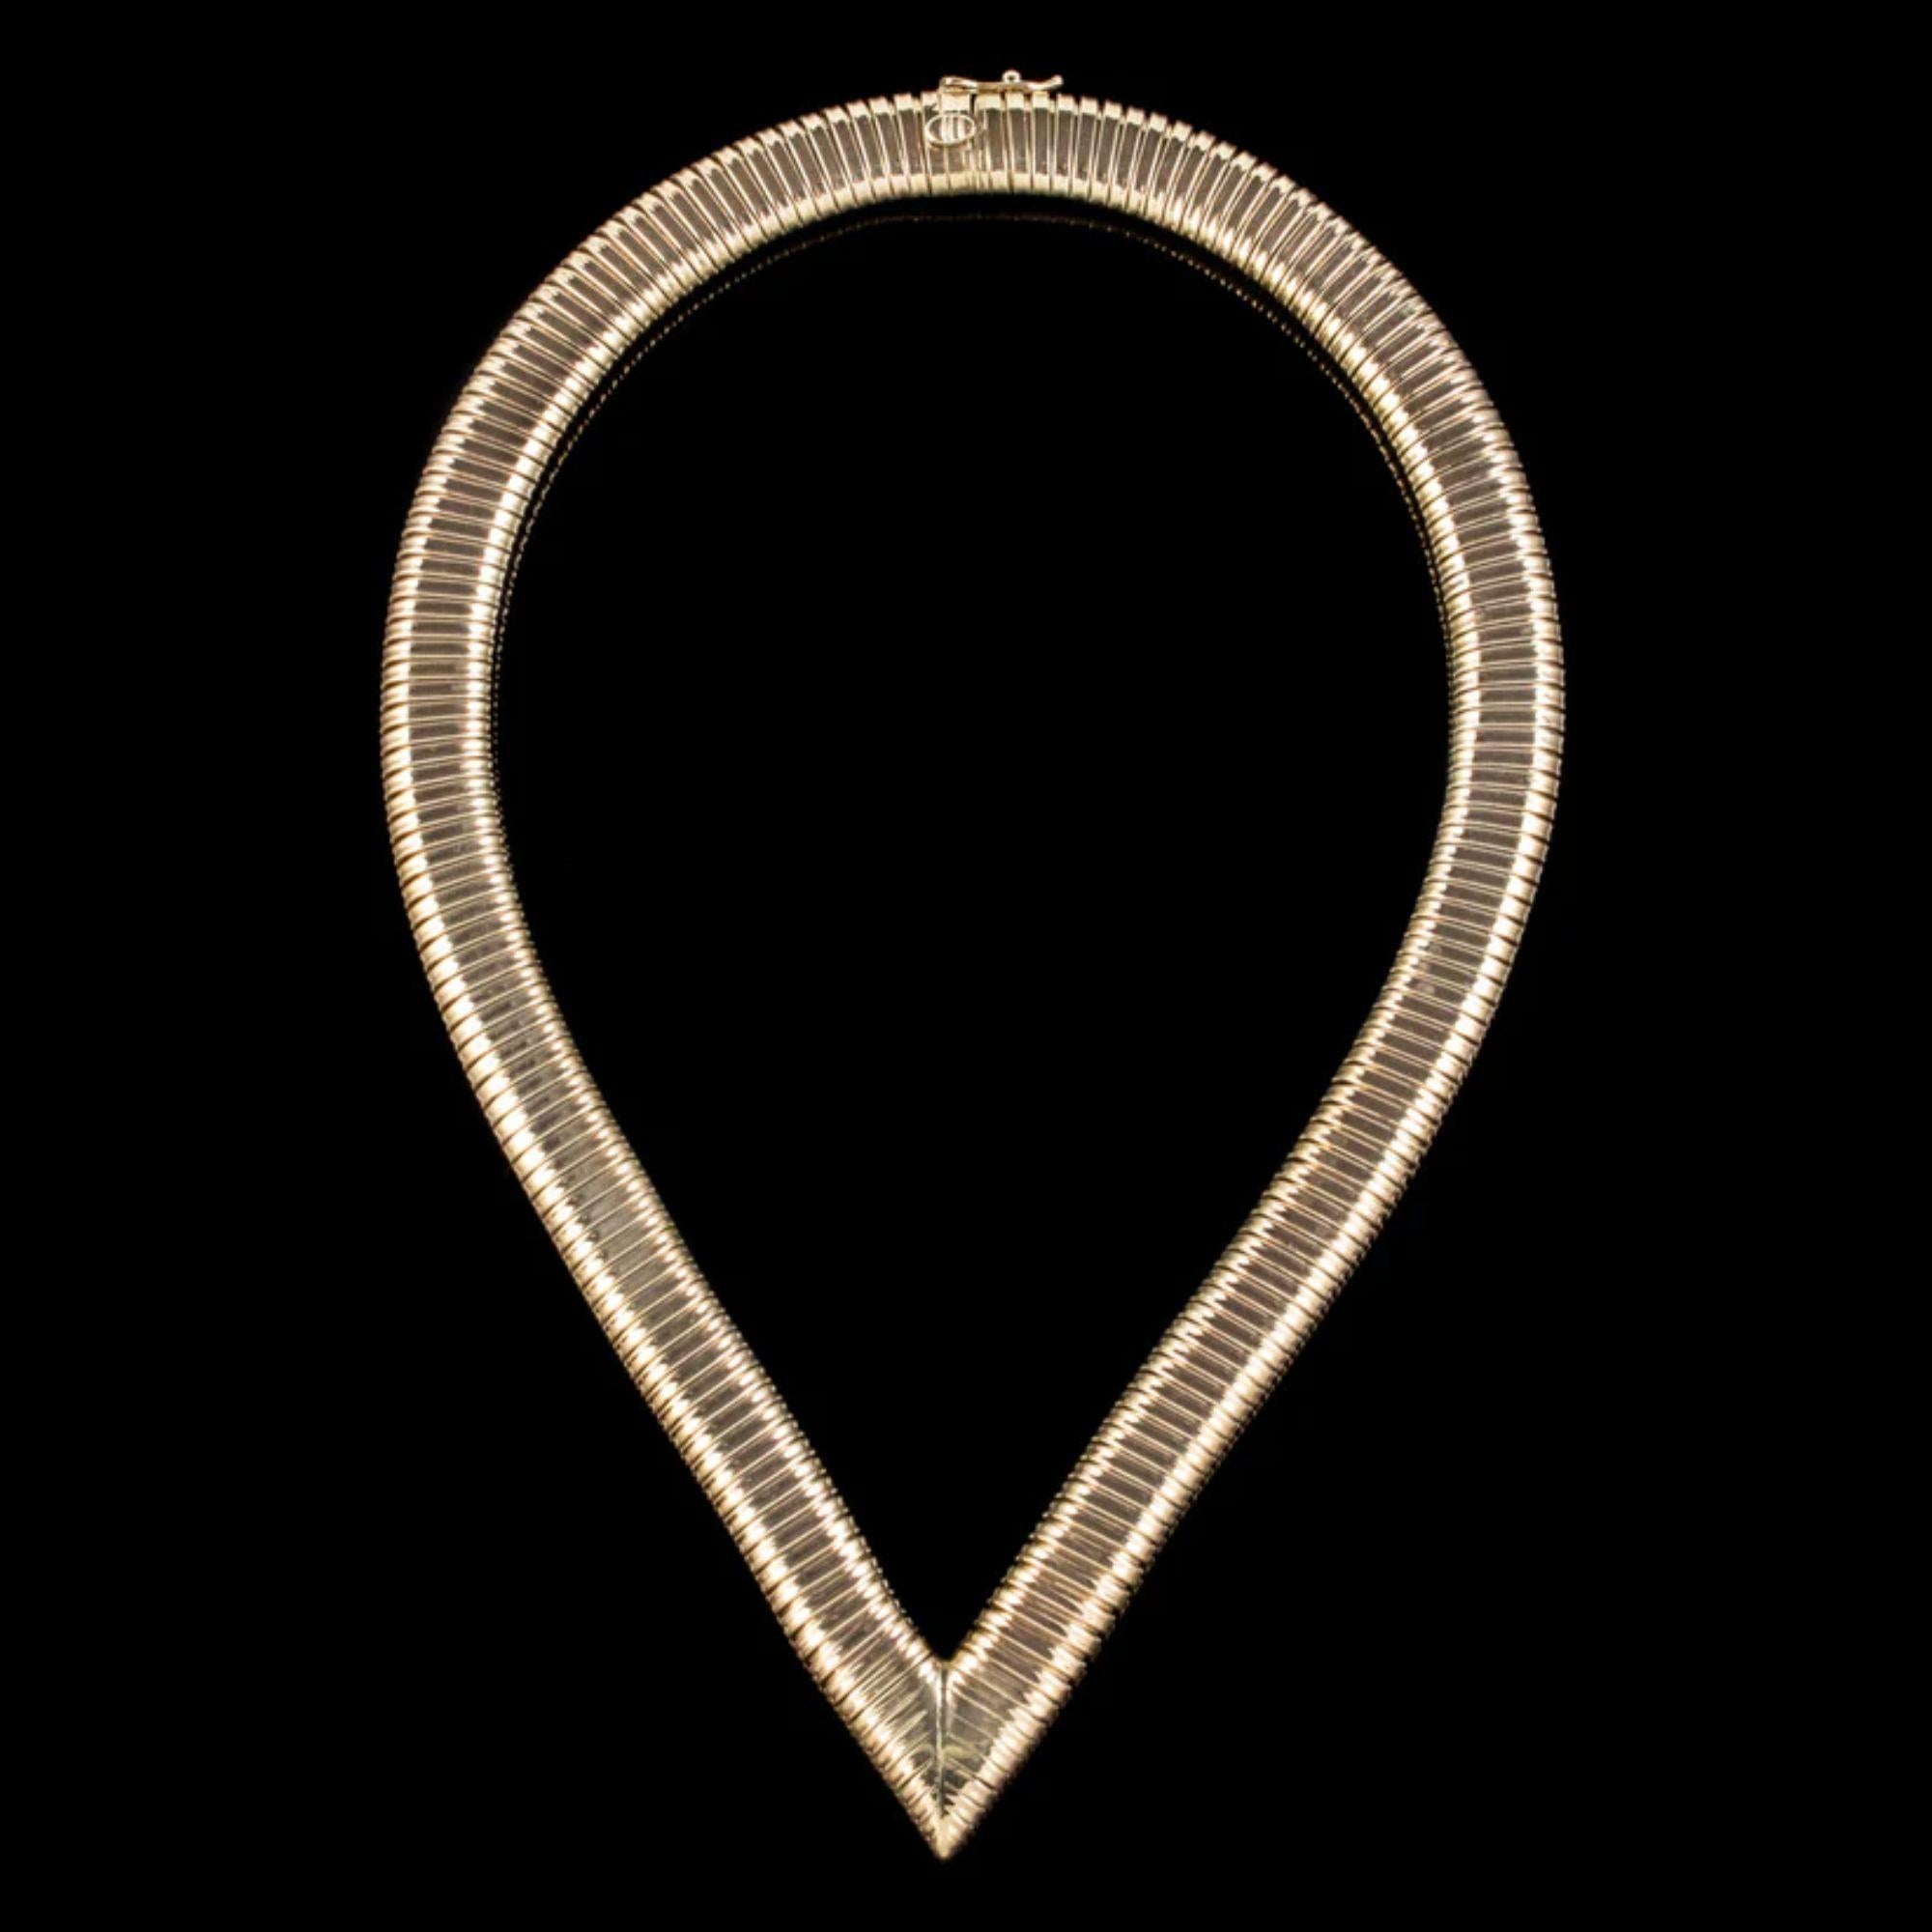 A remarkable mid 20th Century snake collar with a thick 9ct Yellow Gold band that comes to a signature point at the bottom. Its ingenious design is articulated and expands to fit comfortably around the neck when worn.

It’s very distinctive and